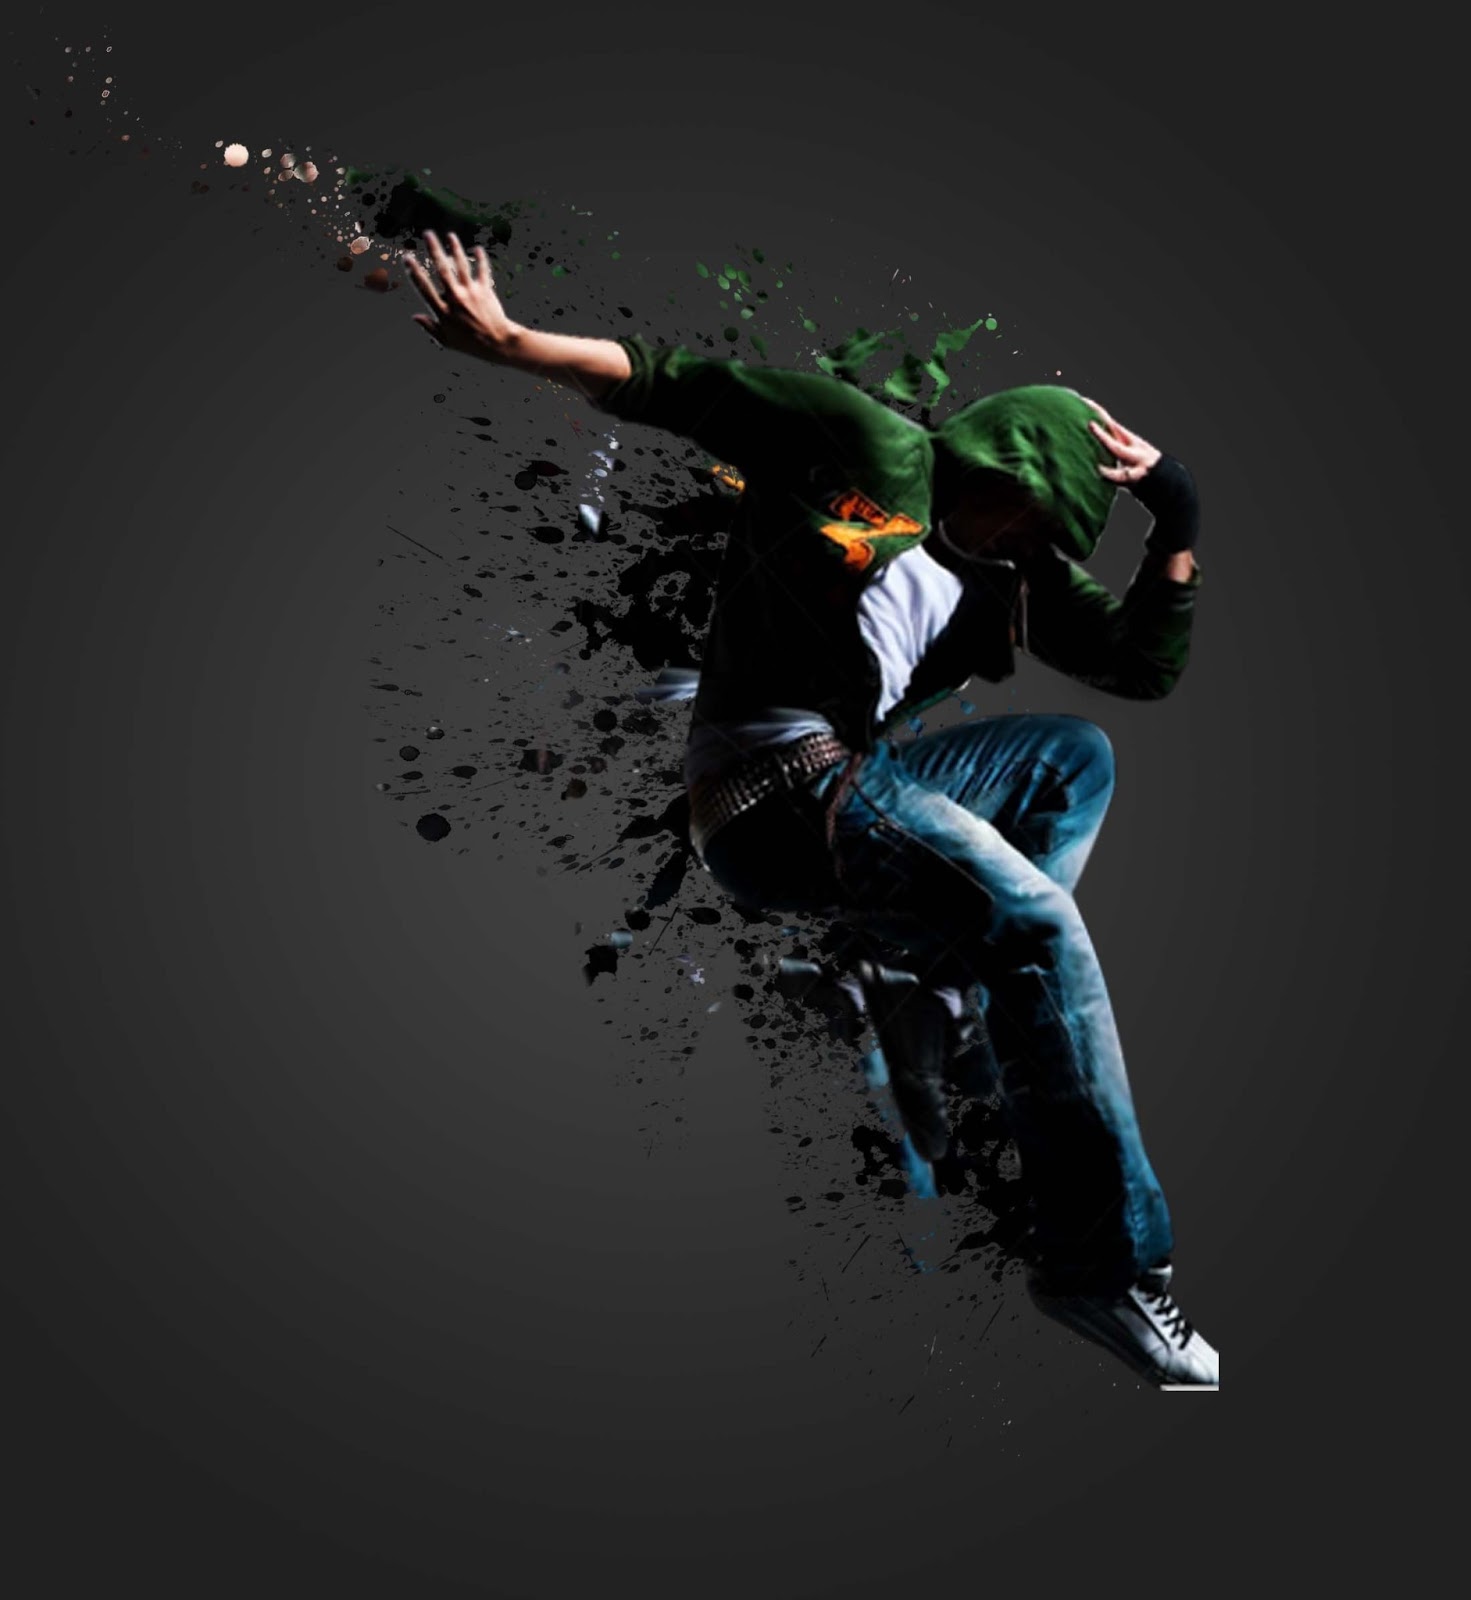 How to Create Dispersion Effect in Photoshop | Photoshop Tutorials